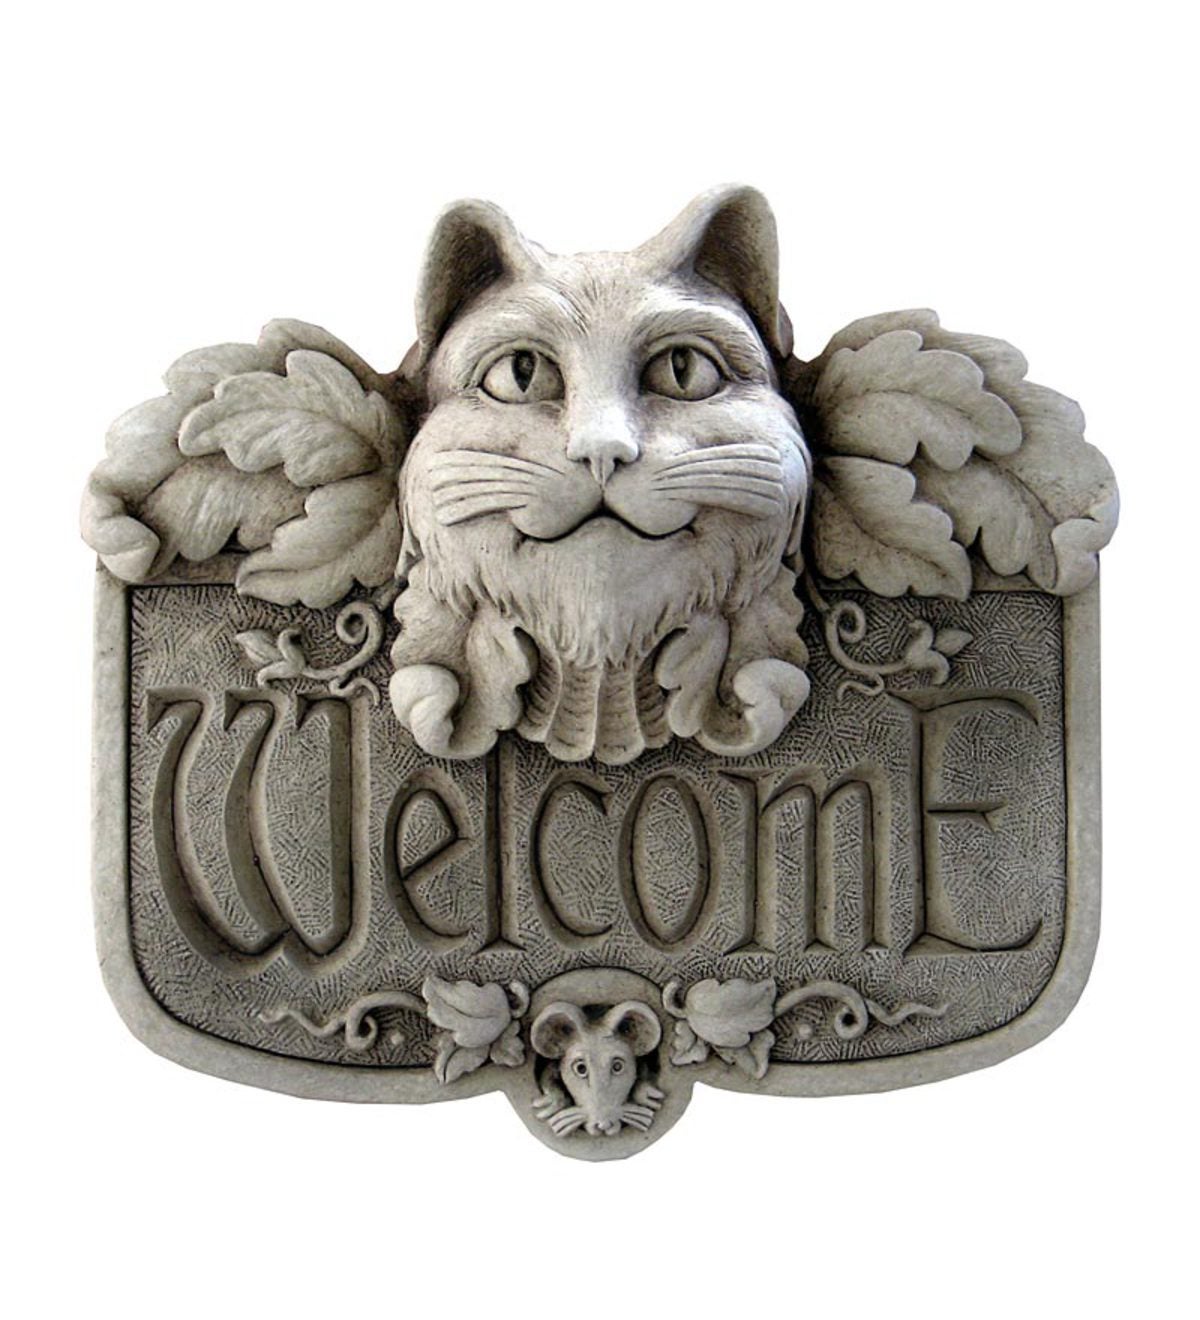 Gothic Cat Welcome Hand Cast Stone Plaque by Carruth Studio